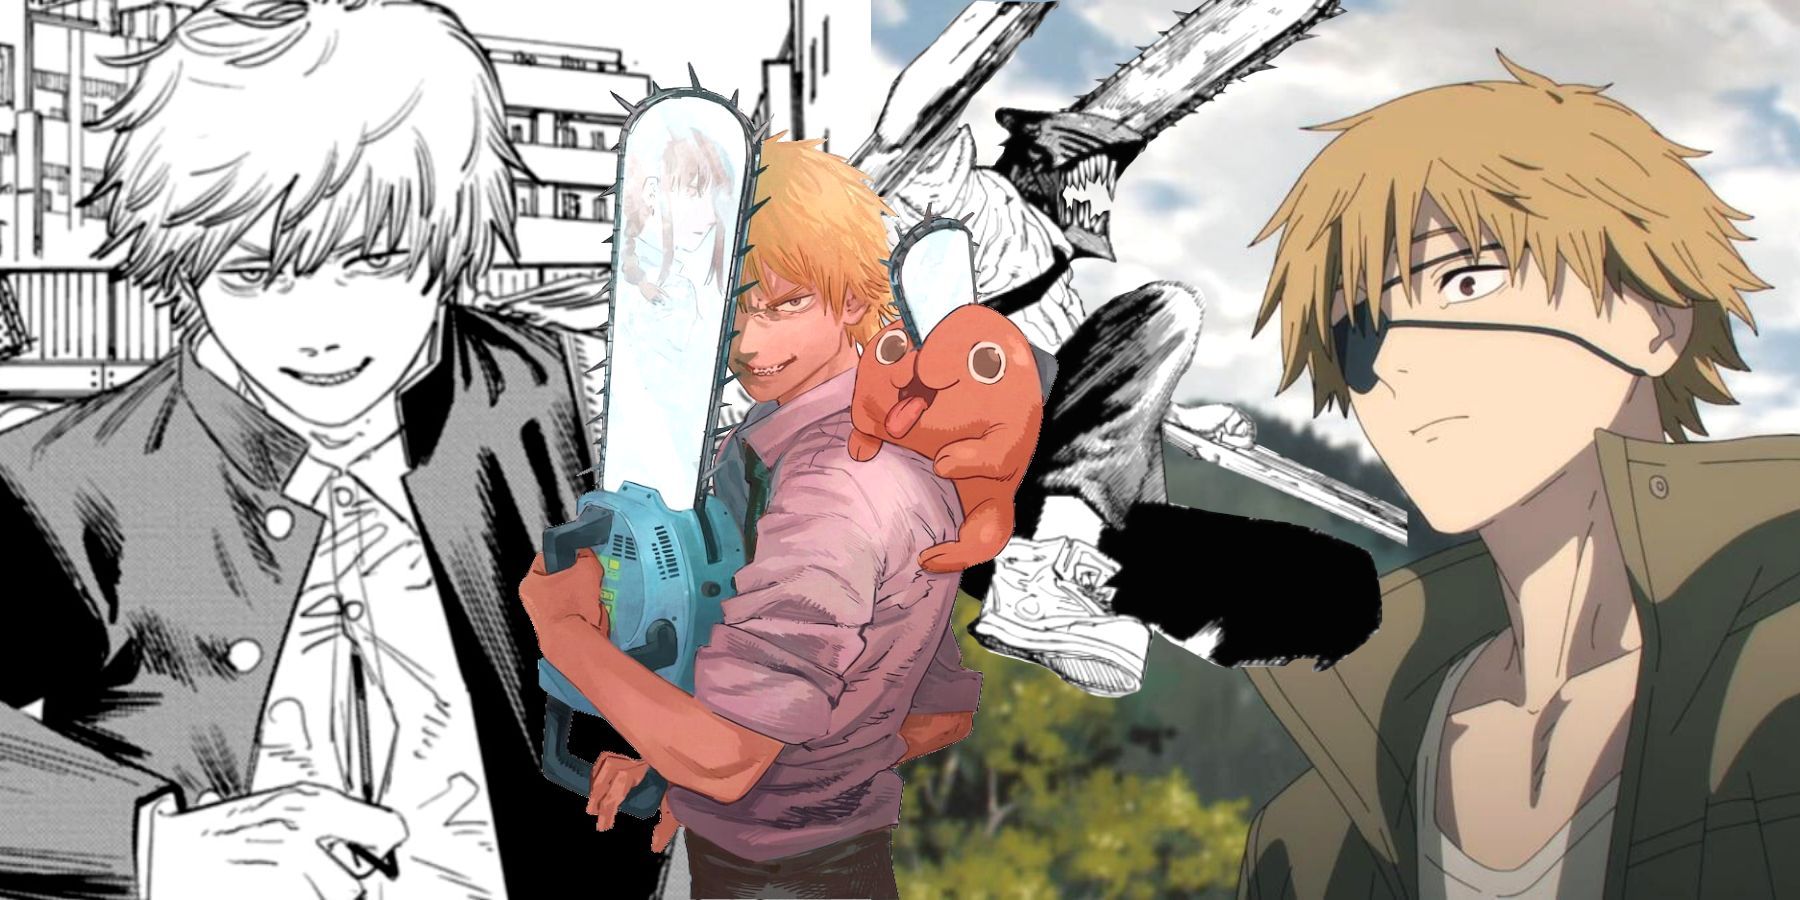 Chainsaw Man's Denji Has Lost His Title as Shonen's Most Tortured Hero